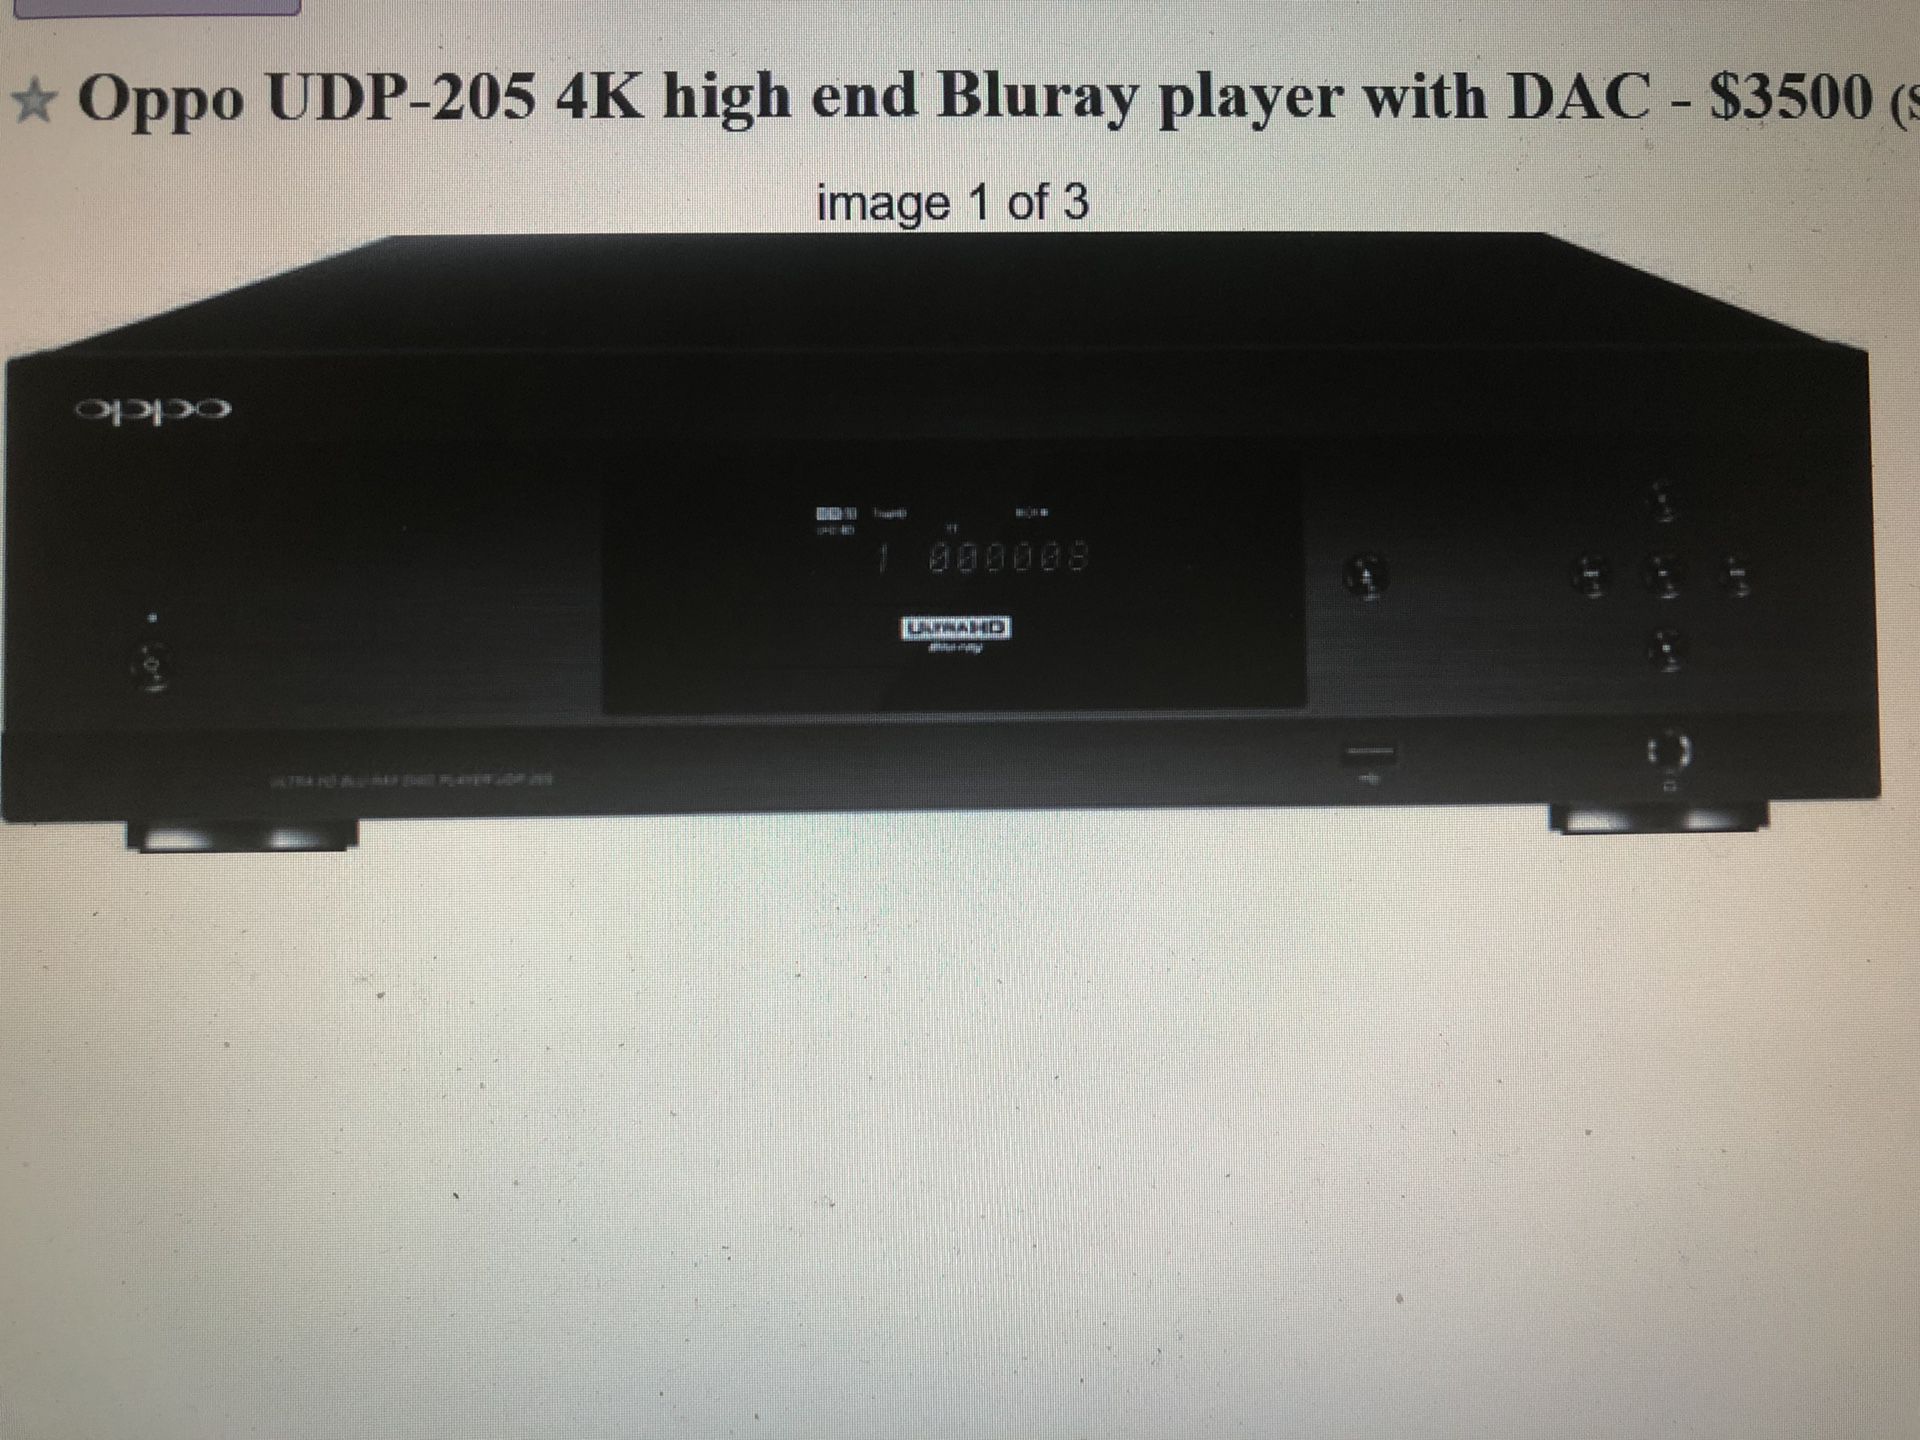 Oppo UDP-205 4K high end ultra HD Blu-ray player with DAC